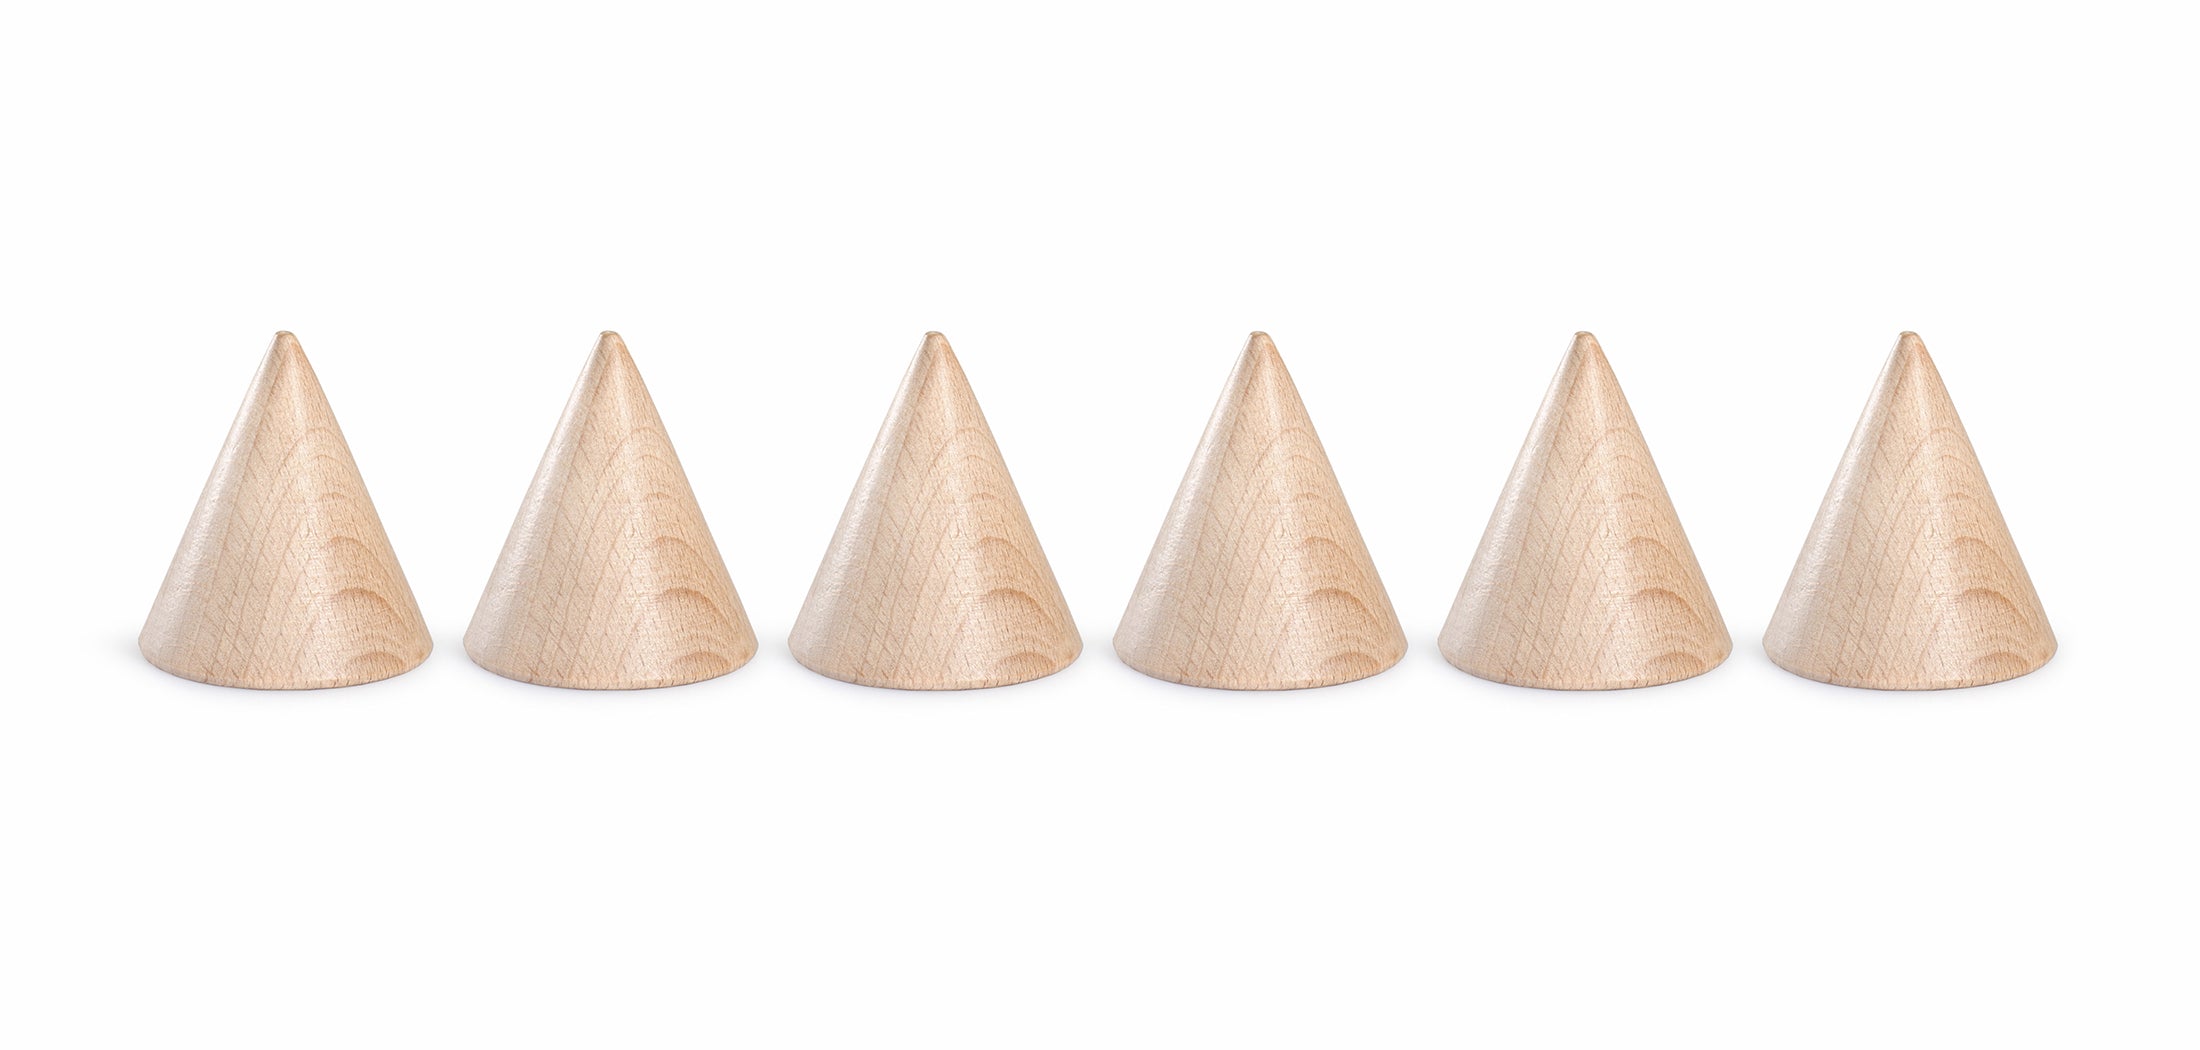 Grapat Natural Cones with 6 Pieces | Heuristic Play | Children of the Wild